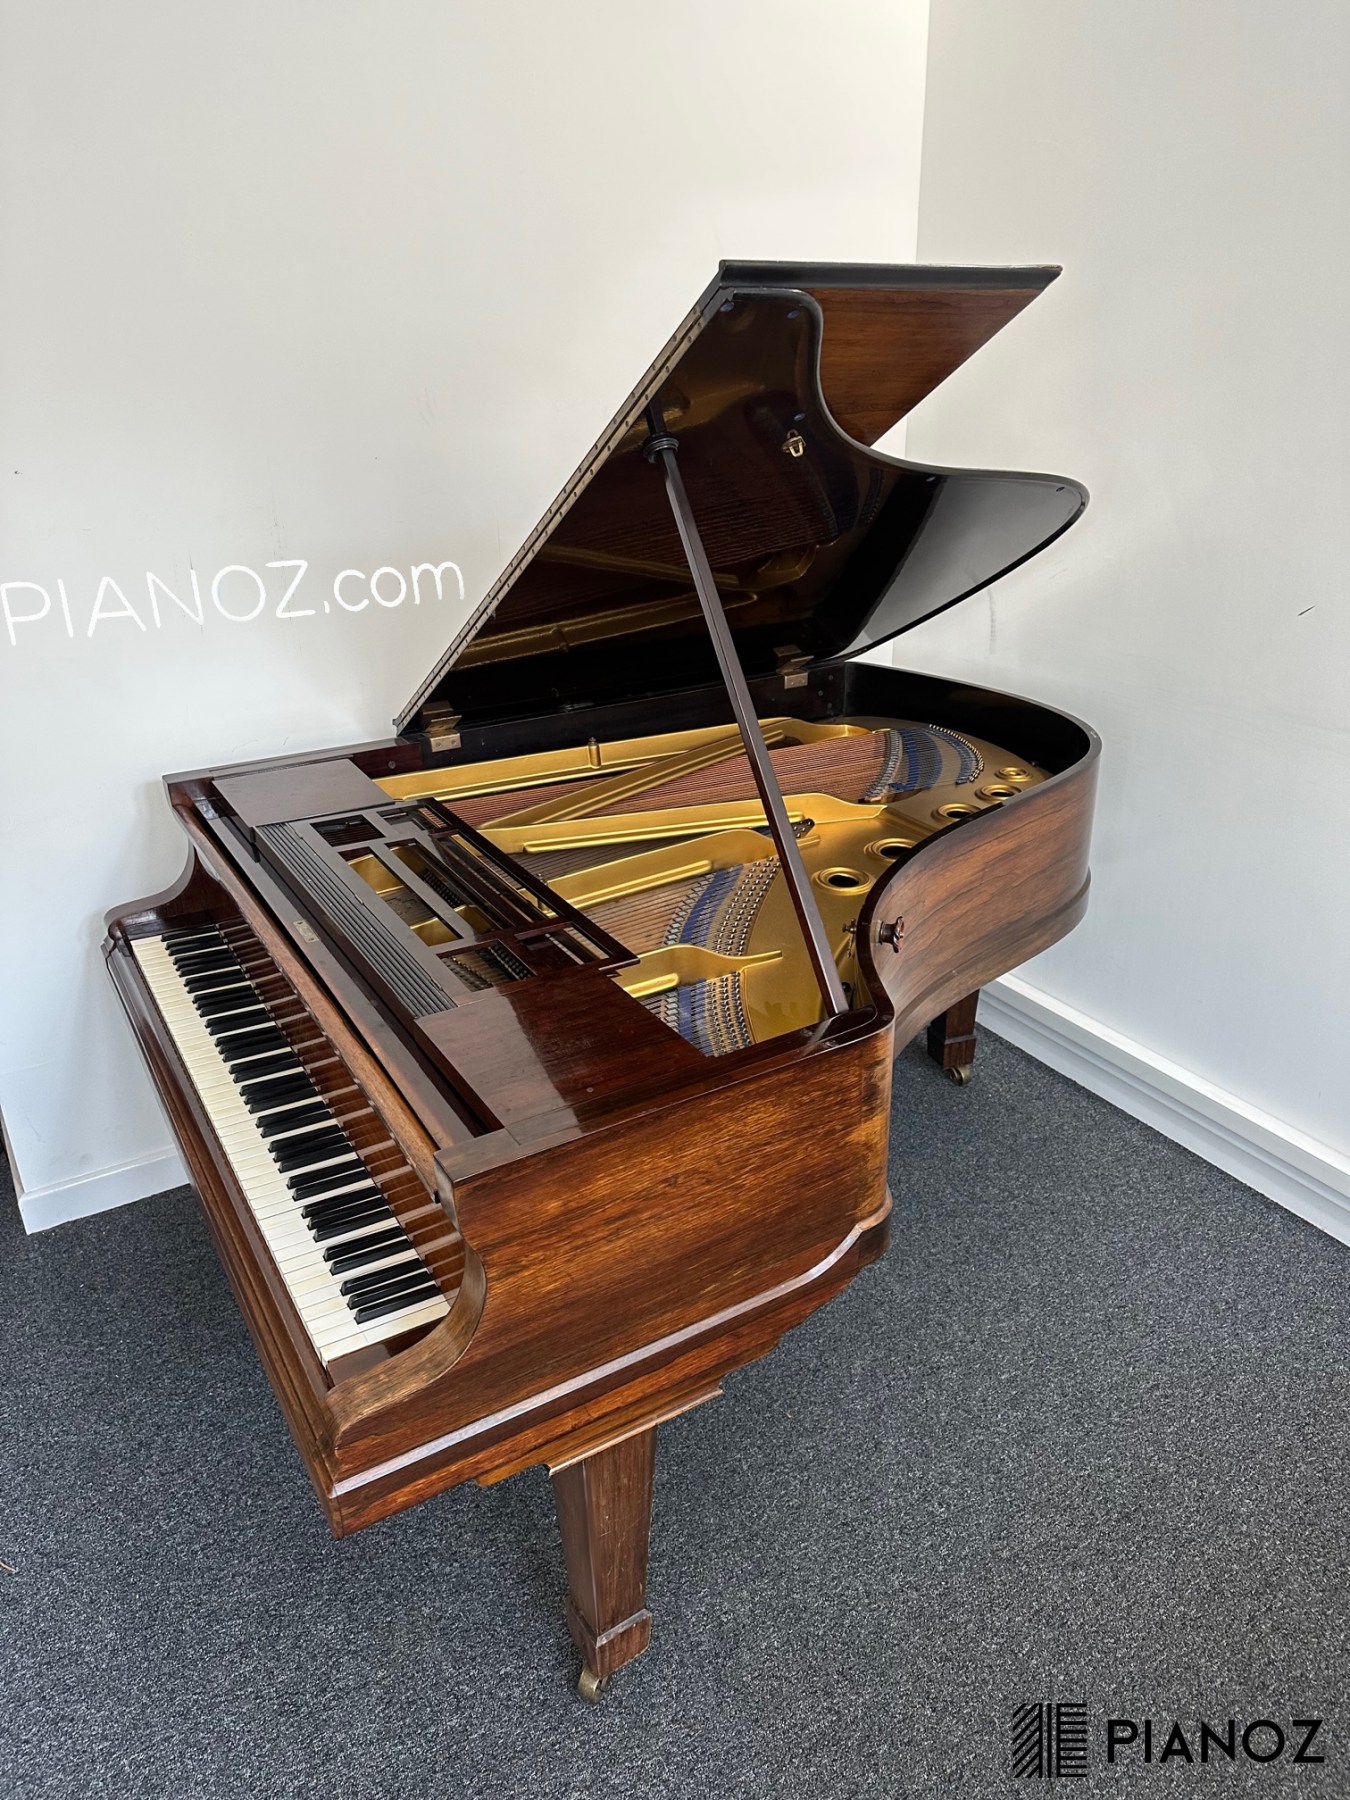 Bluthner 6ft Restored Grand Piano piano for sale in UK